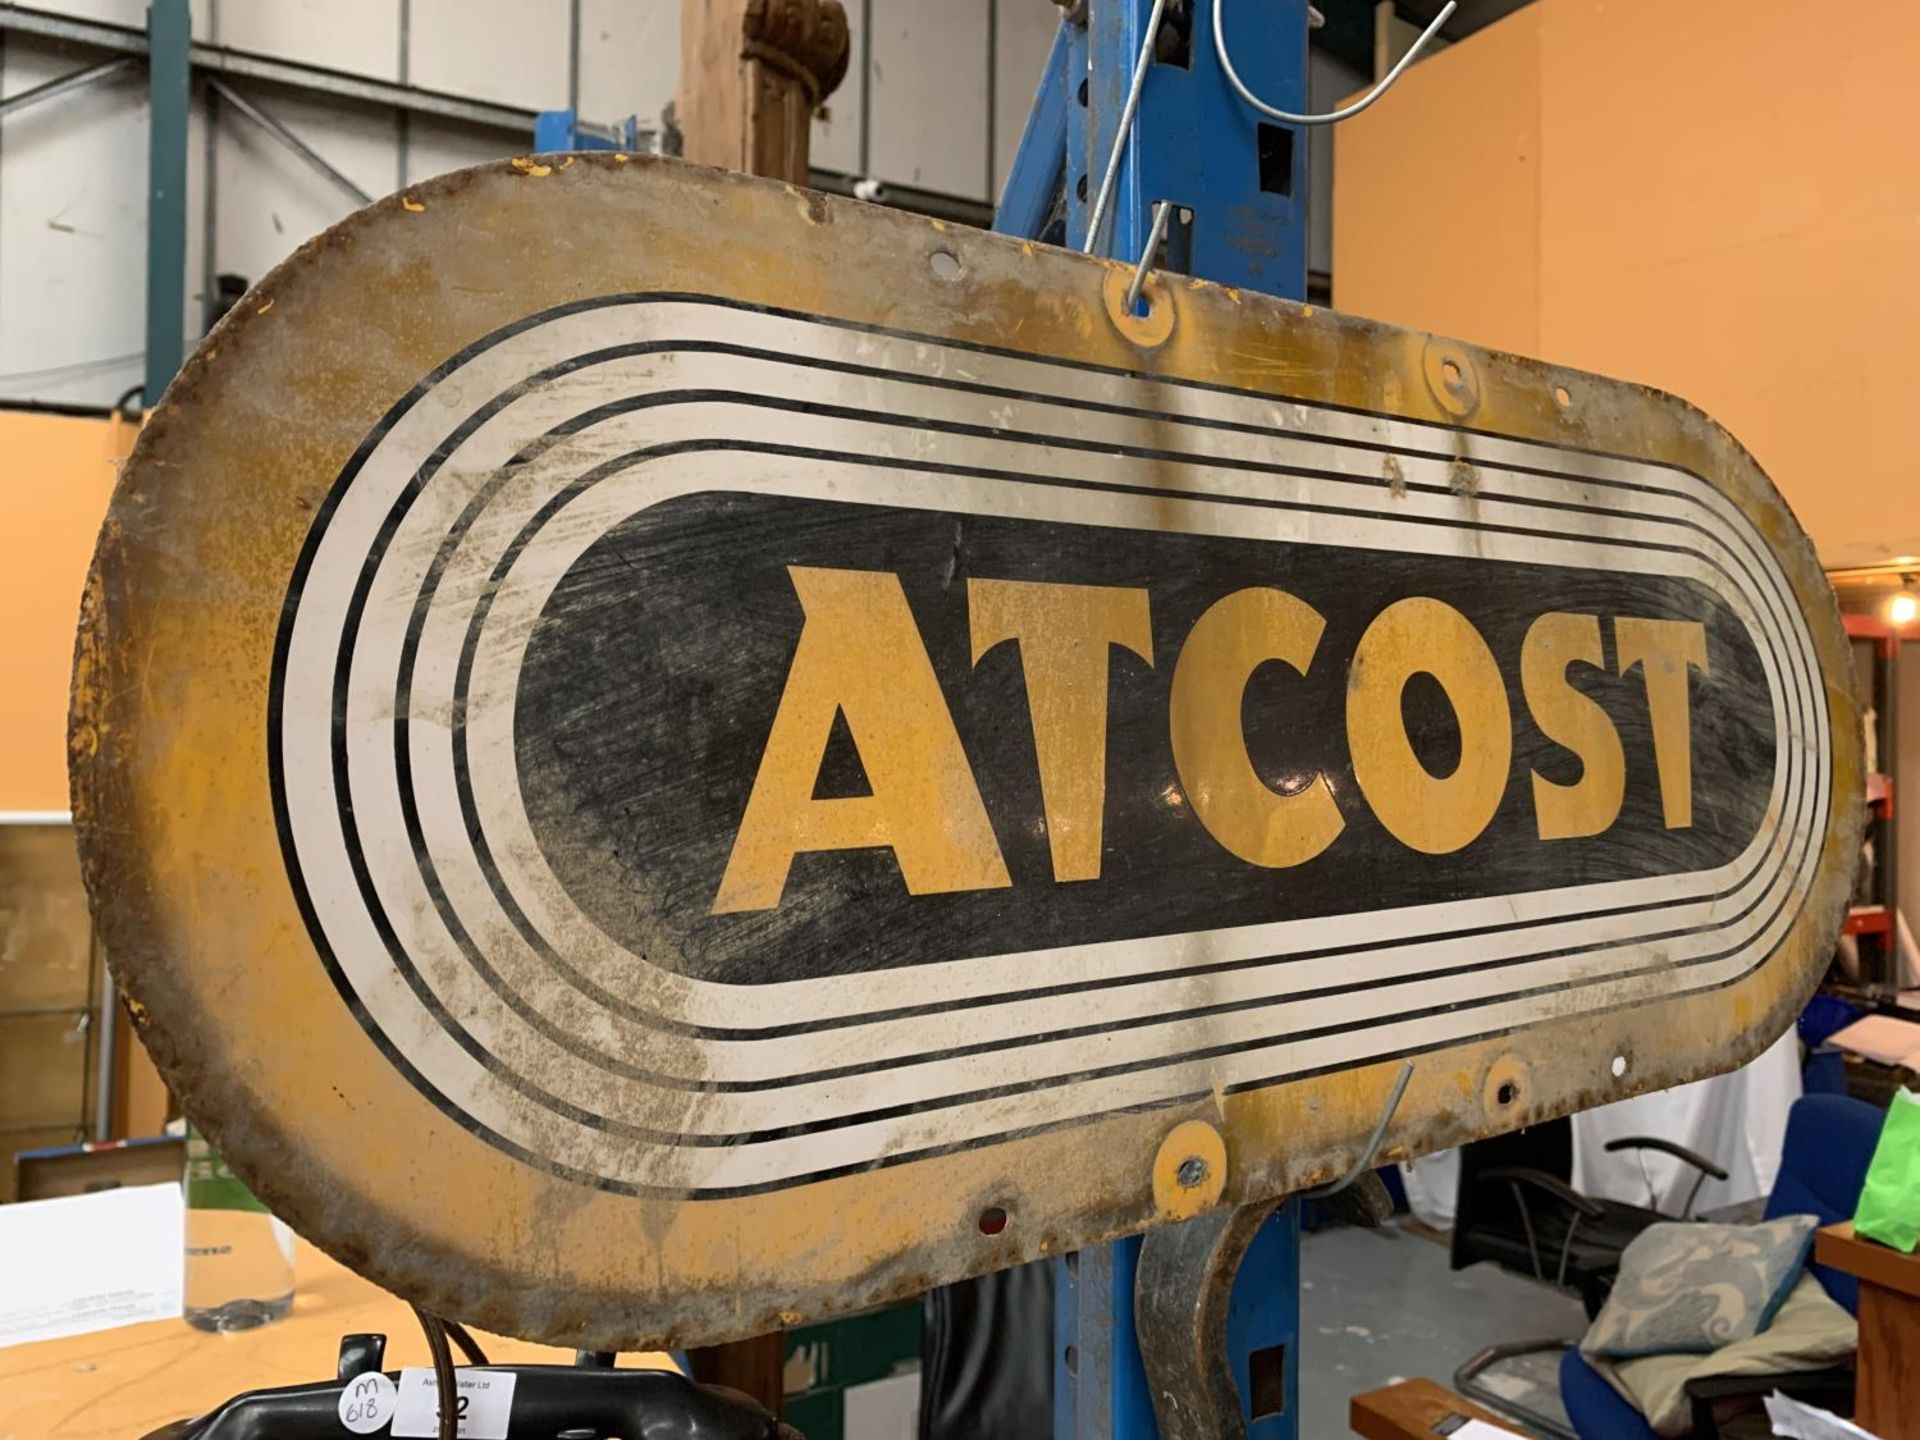 AN ATCOST ENAMEL SIGN - Image 2 of 2